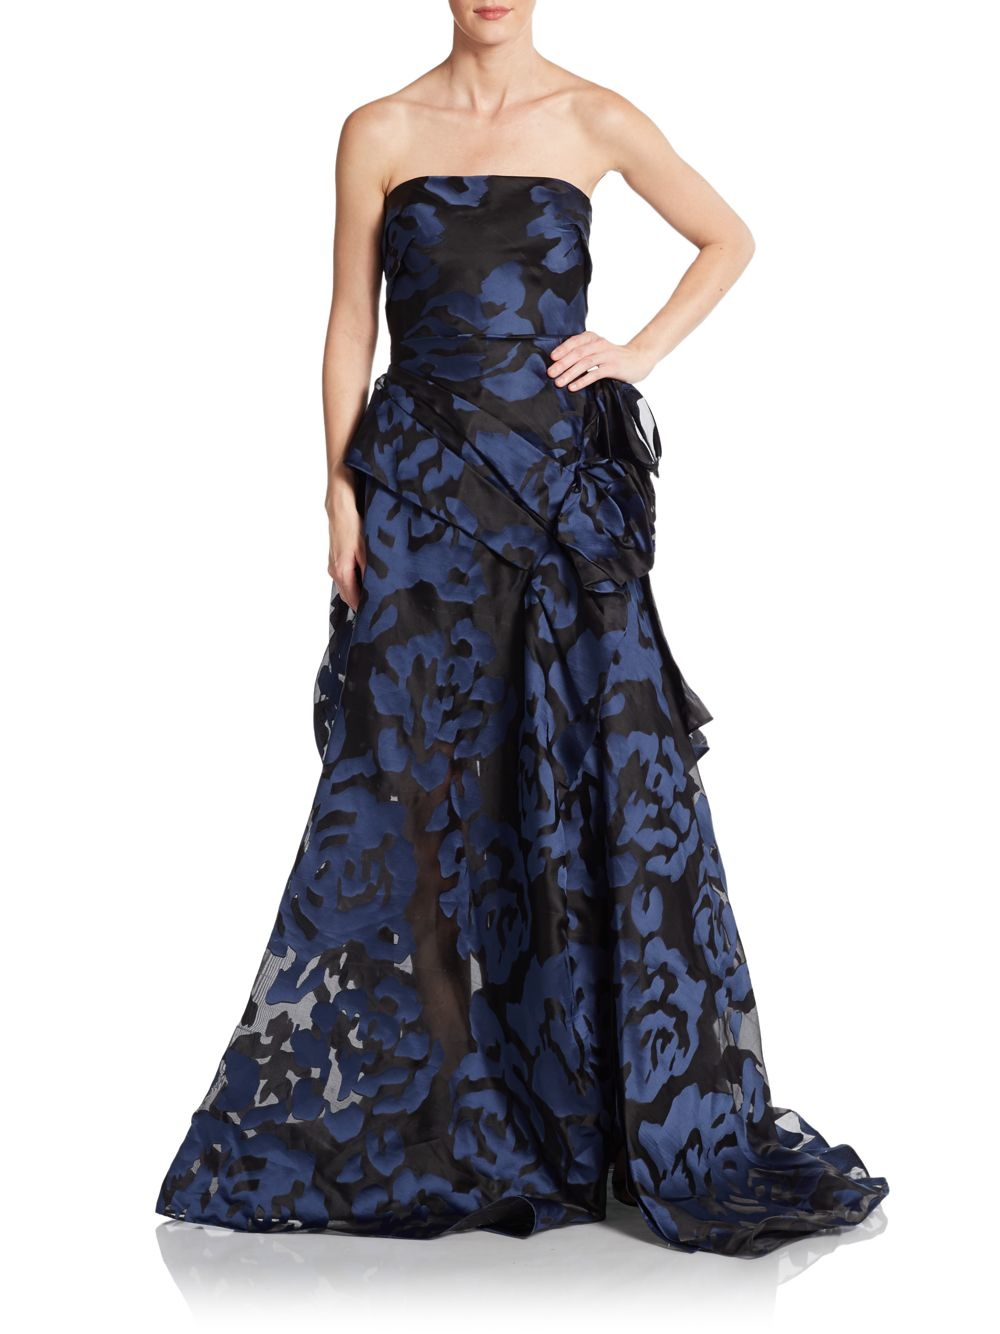 Lyst - Rubin Singer Floral Strapless A-line Gown in Blue